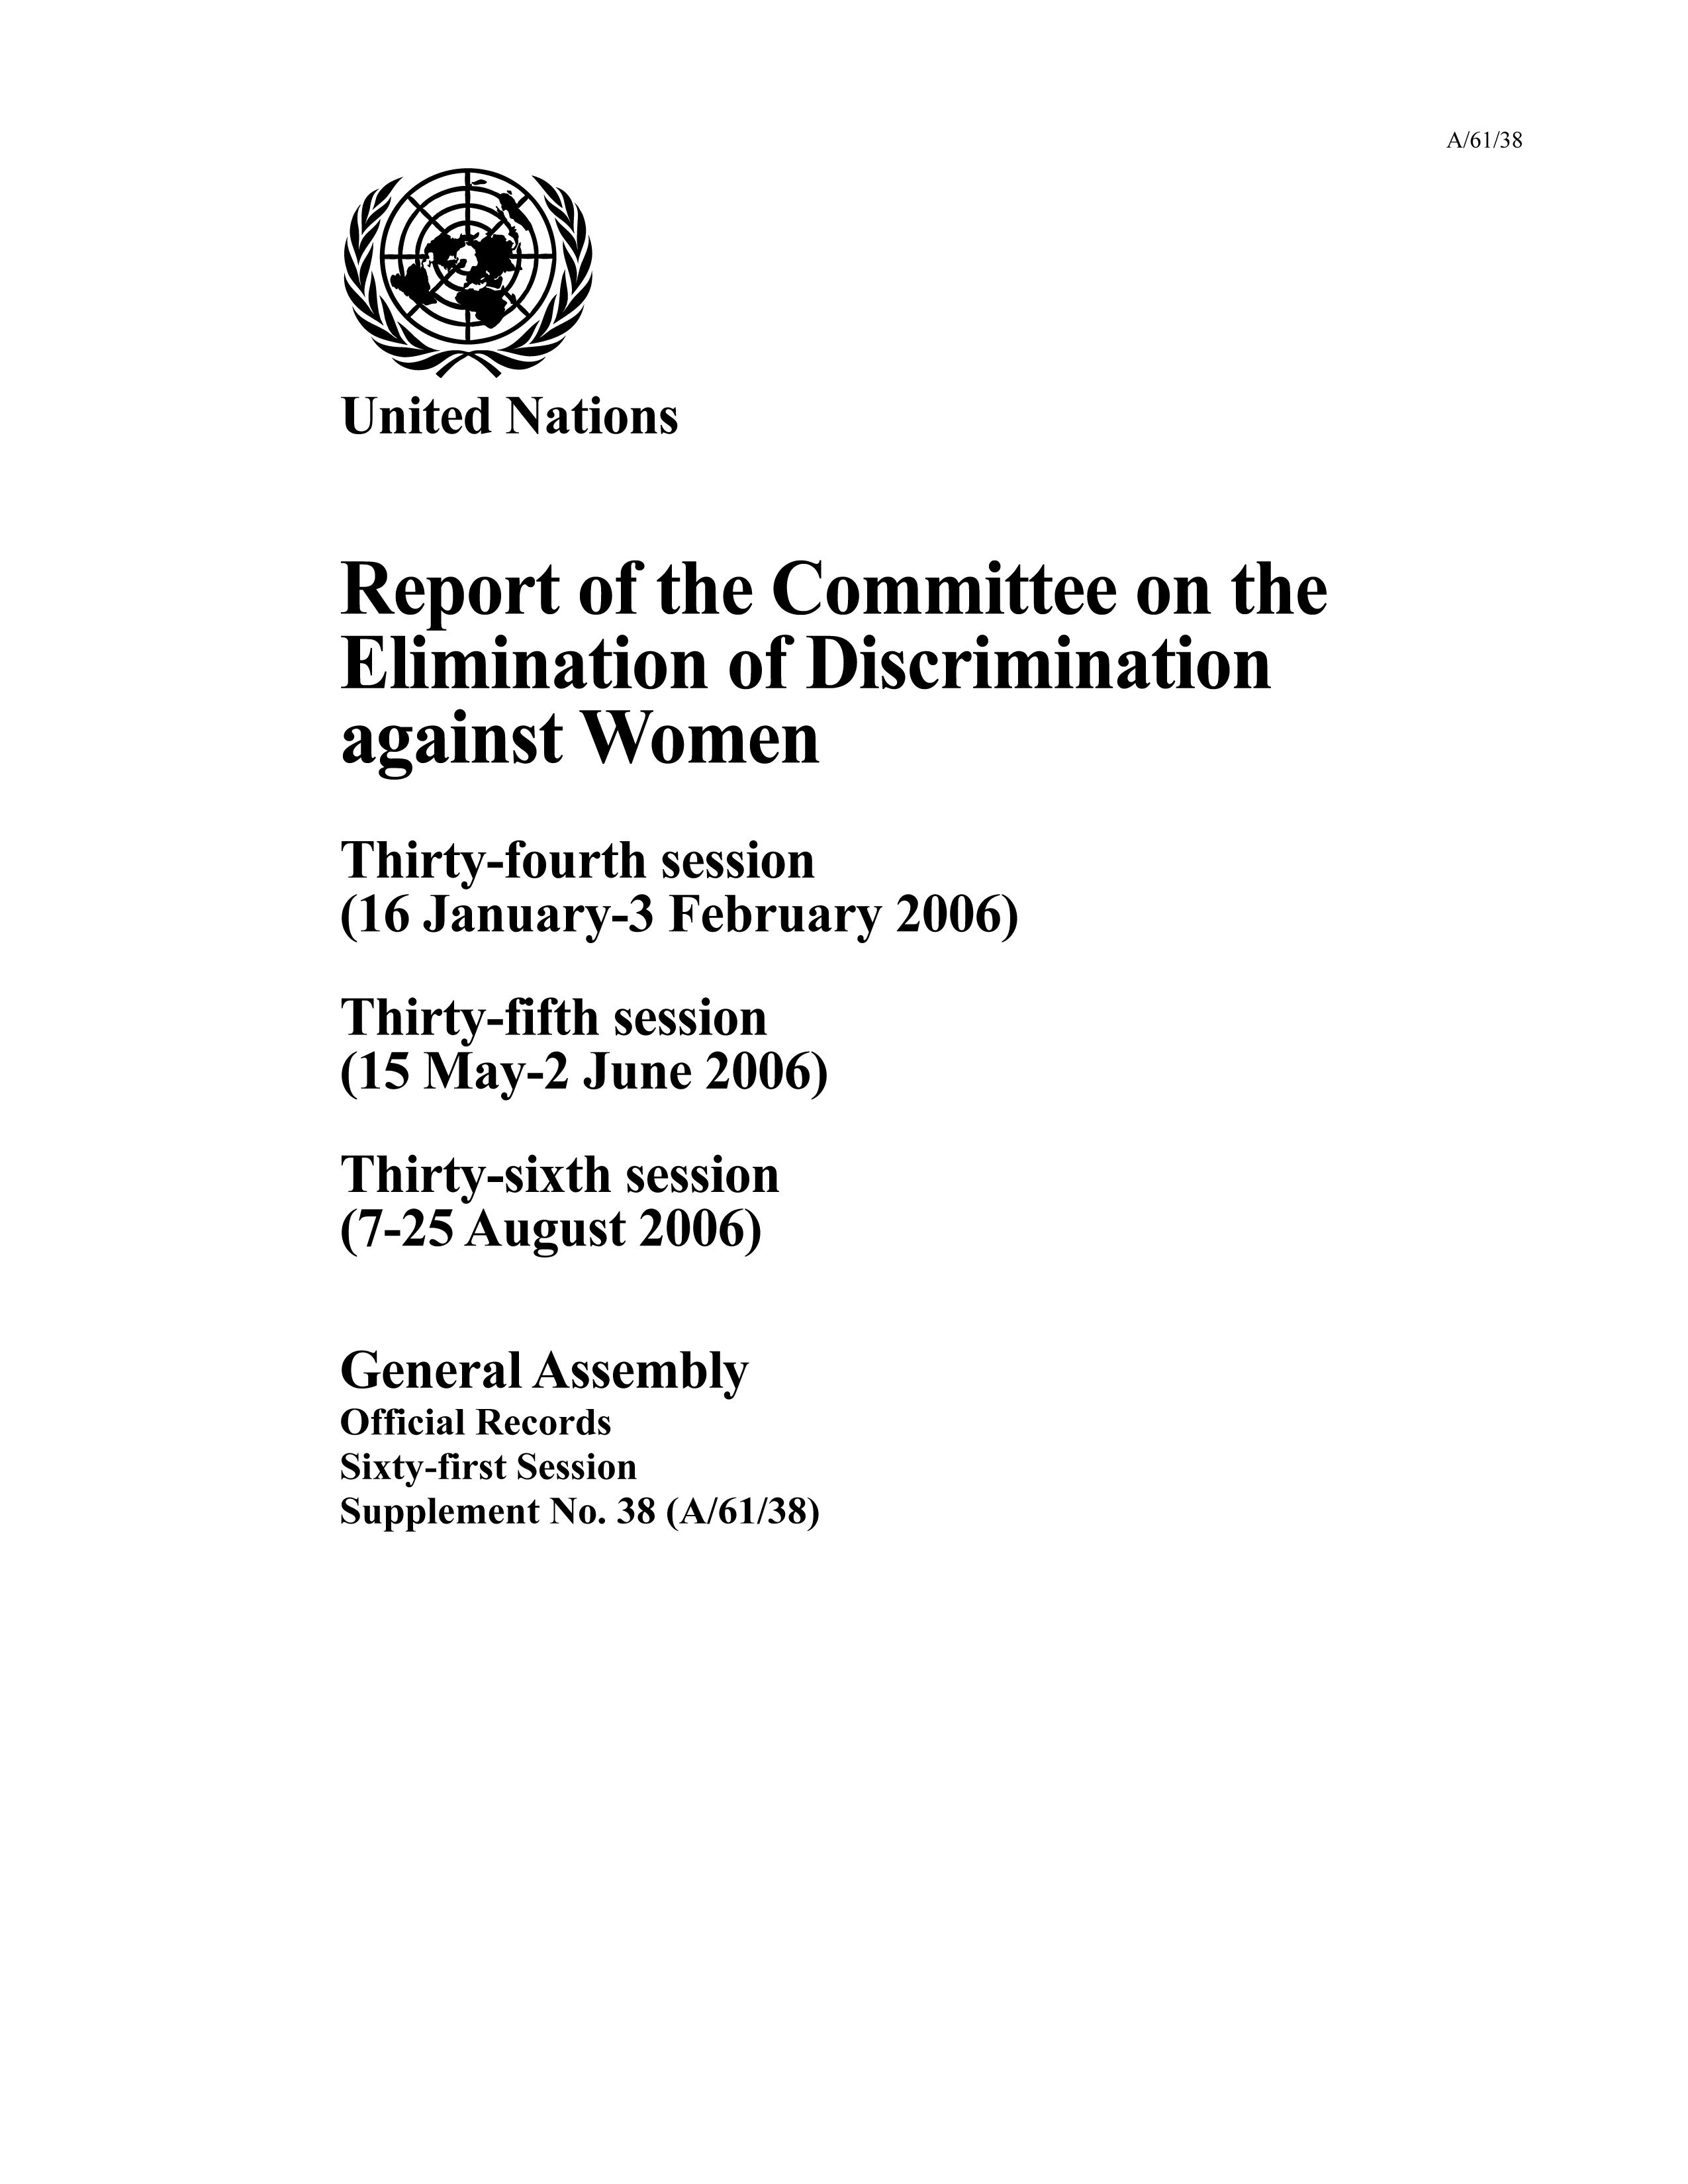 image of Report of the Chairperson on the activities undertaken between the thirty-third and thirty-fourth sessions